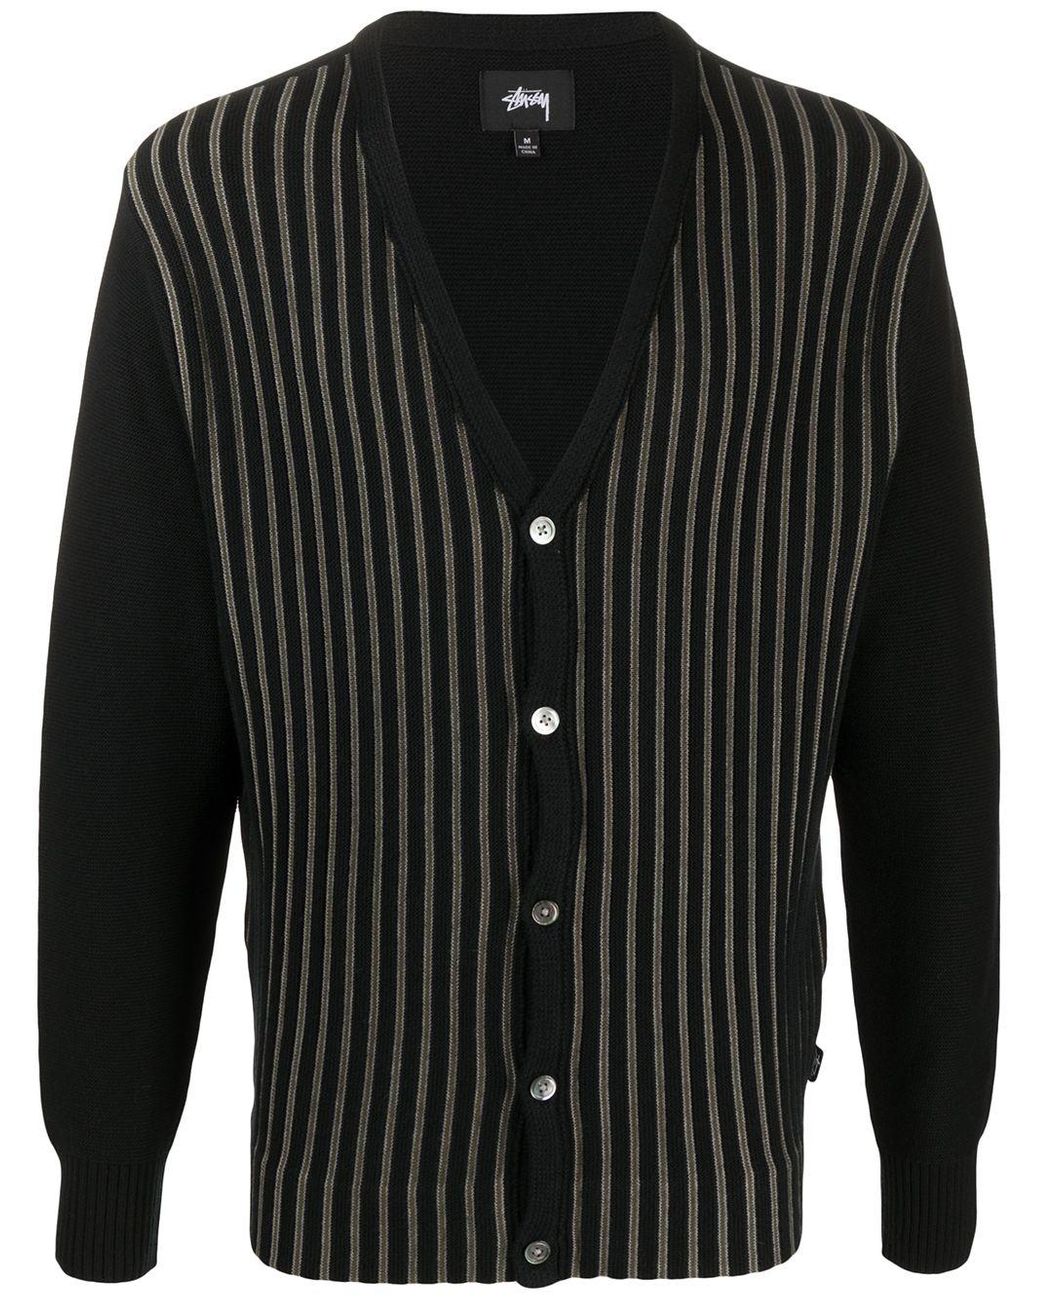 Stussy Cotton Striped Knit Cardigan in Black for Men - Lyst